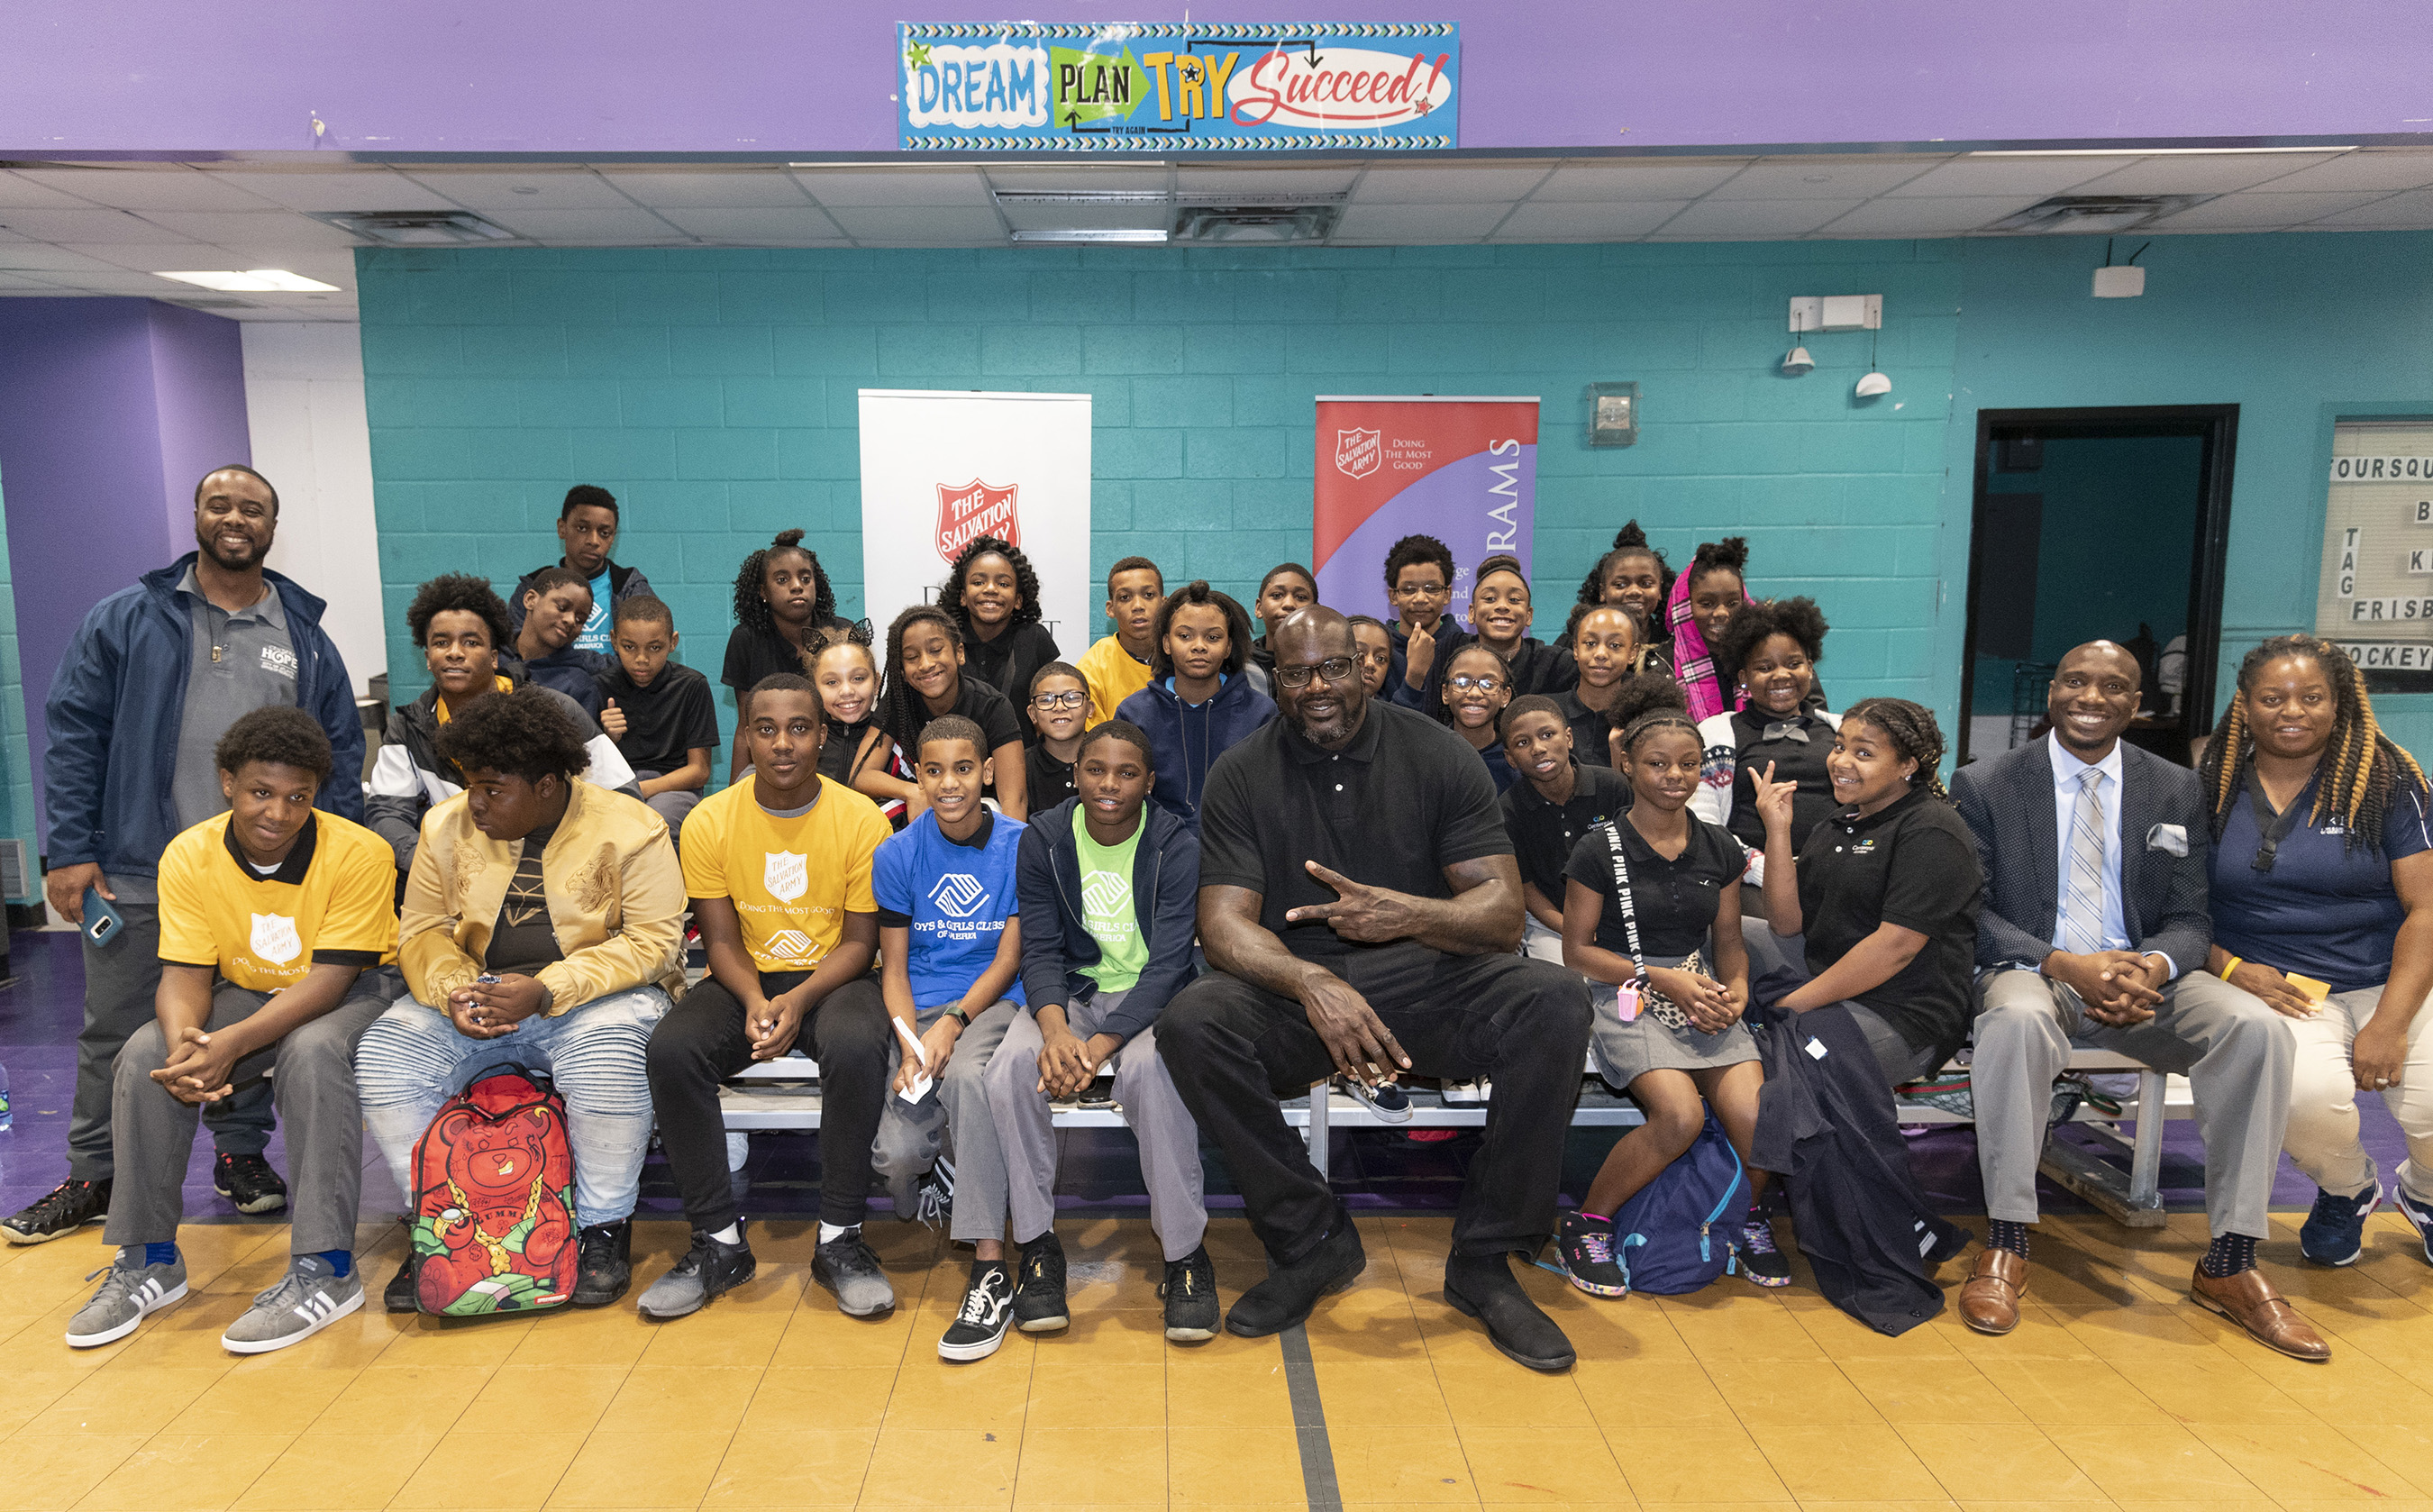 Boys & Girls Clubs of America and Club Alum Shaquille O'Neal announced the winner of the Alumni & Friends Yearbook contest at The Salvation Army Fuqua Boys & Girls Club this week in downtown Atlanta. O'Neal surprised the Atlanta Club teens and had a personal meet and greet with the Yearbook Contest winner.